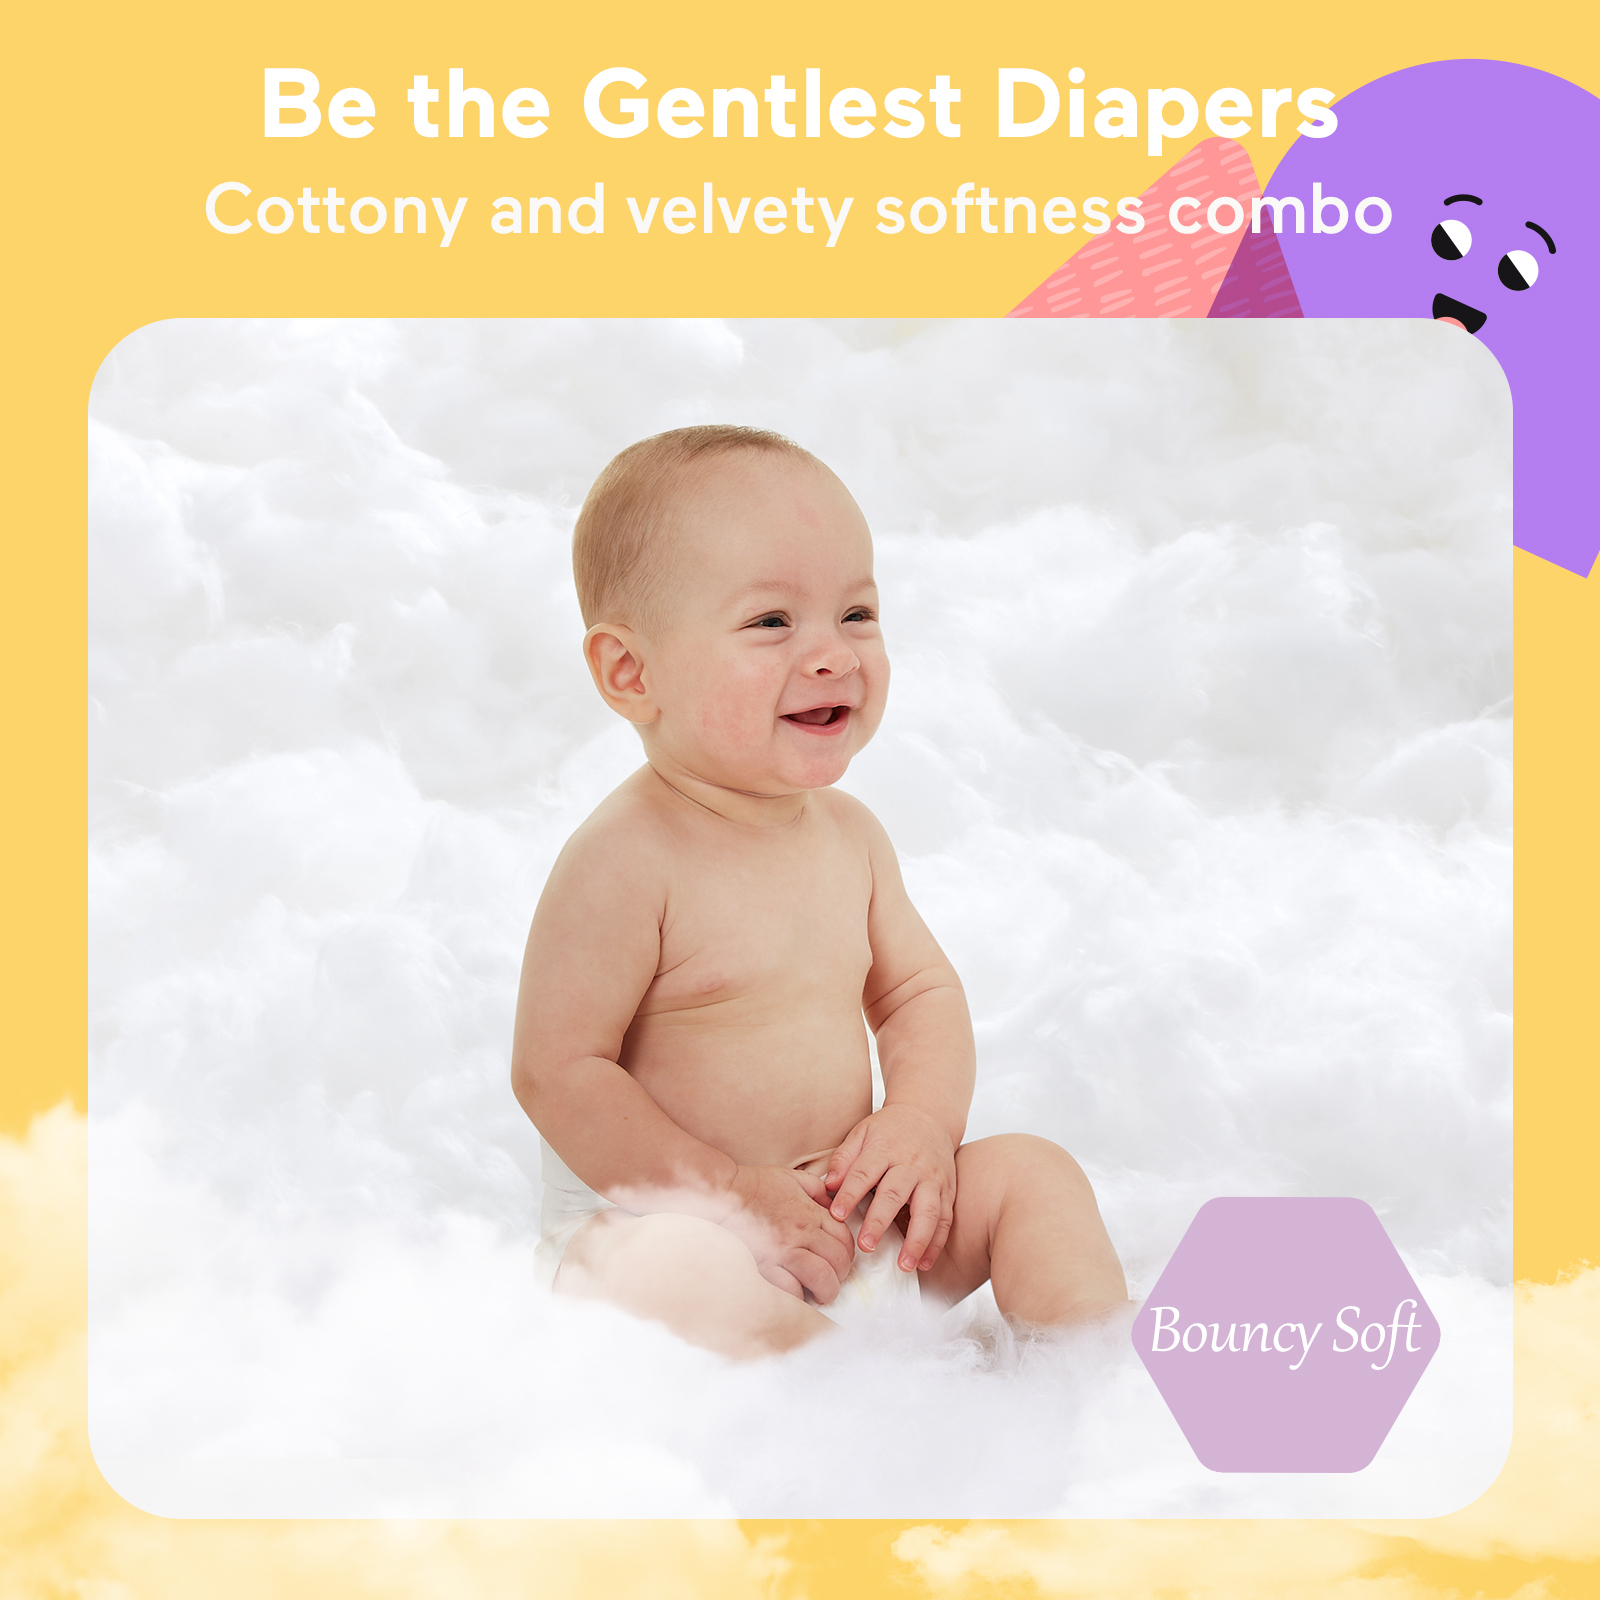 Babycozy Hypoallergenic Diapers Size 4, Baby Dry Disposable Diapers 56 Count - image 3 of 10